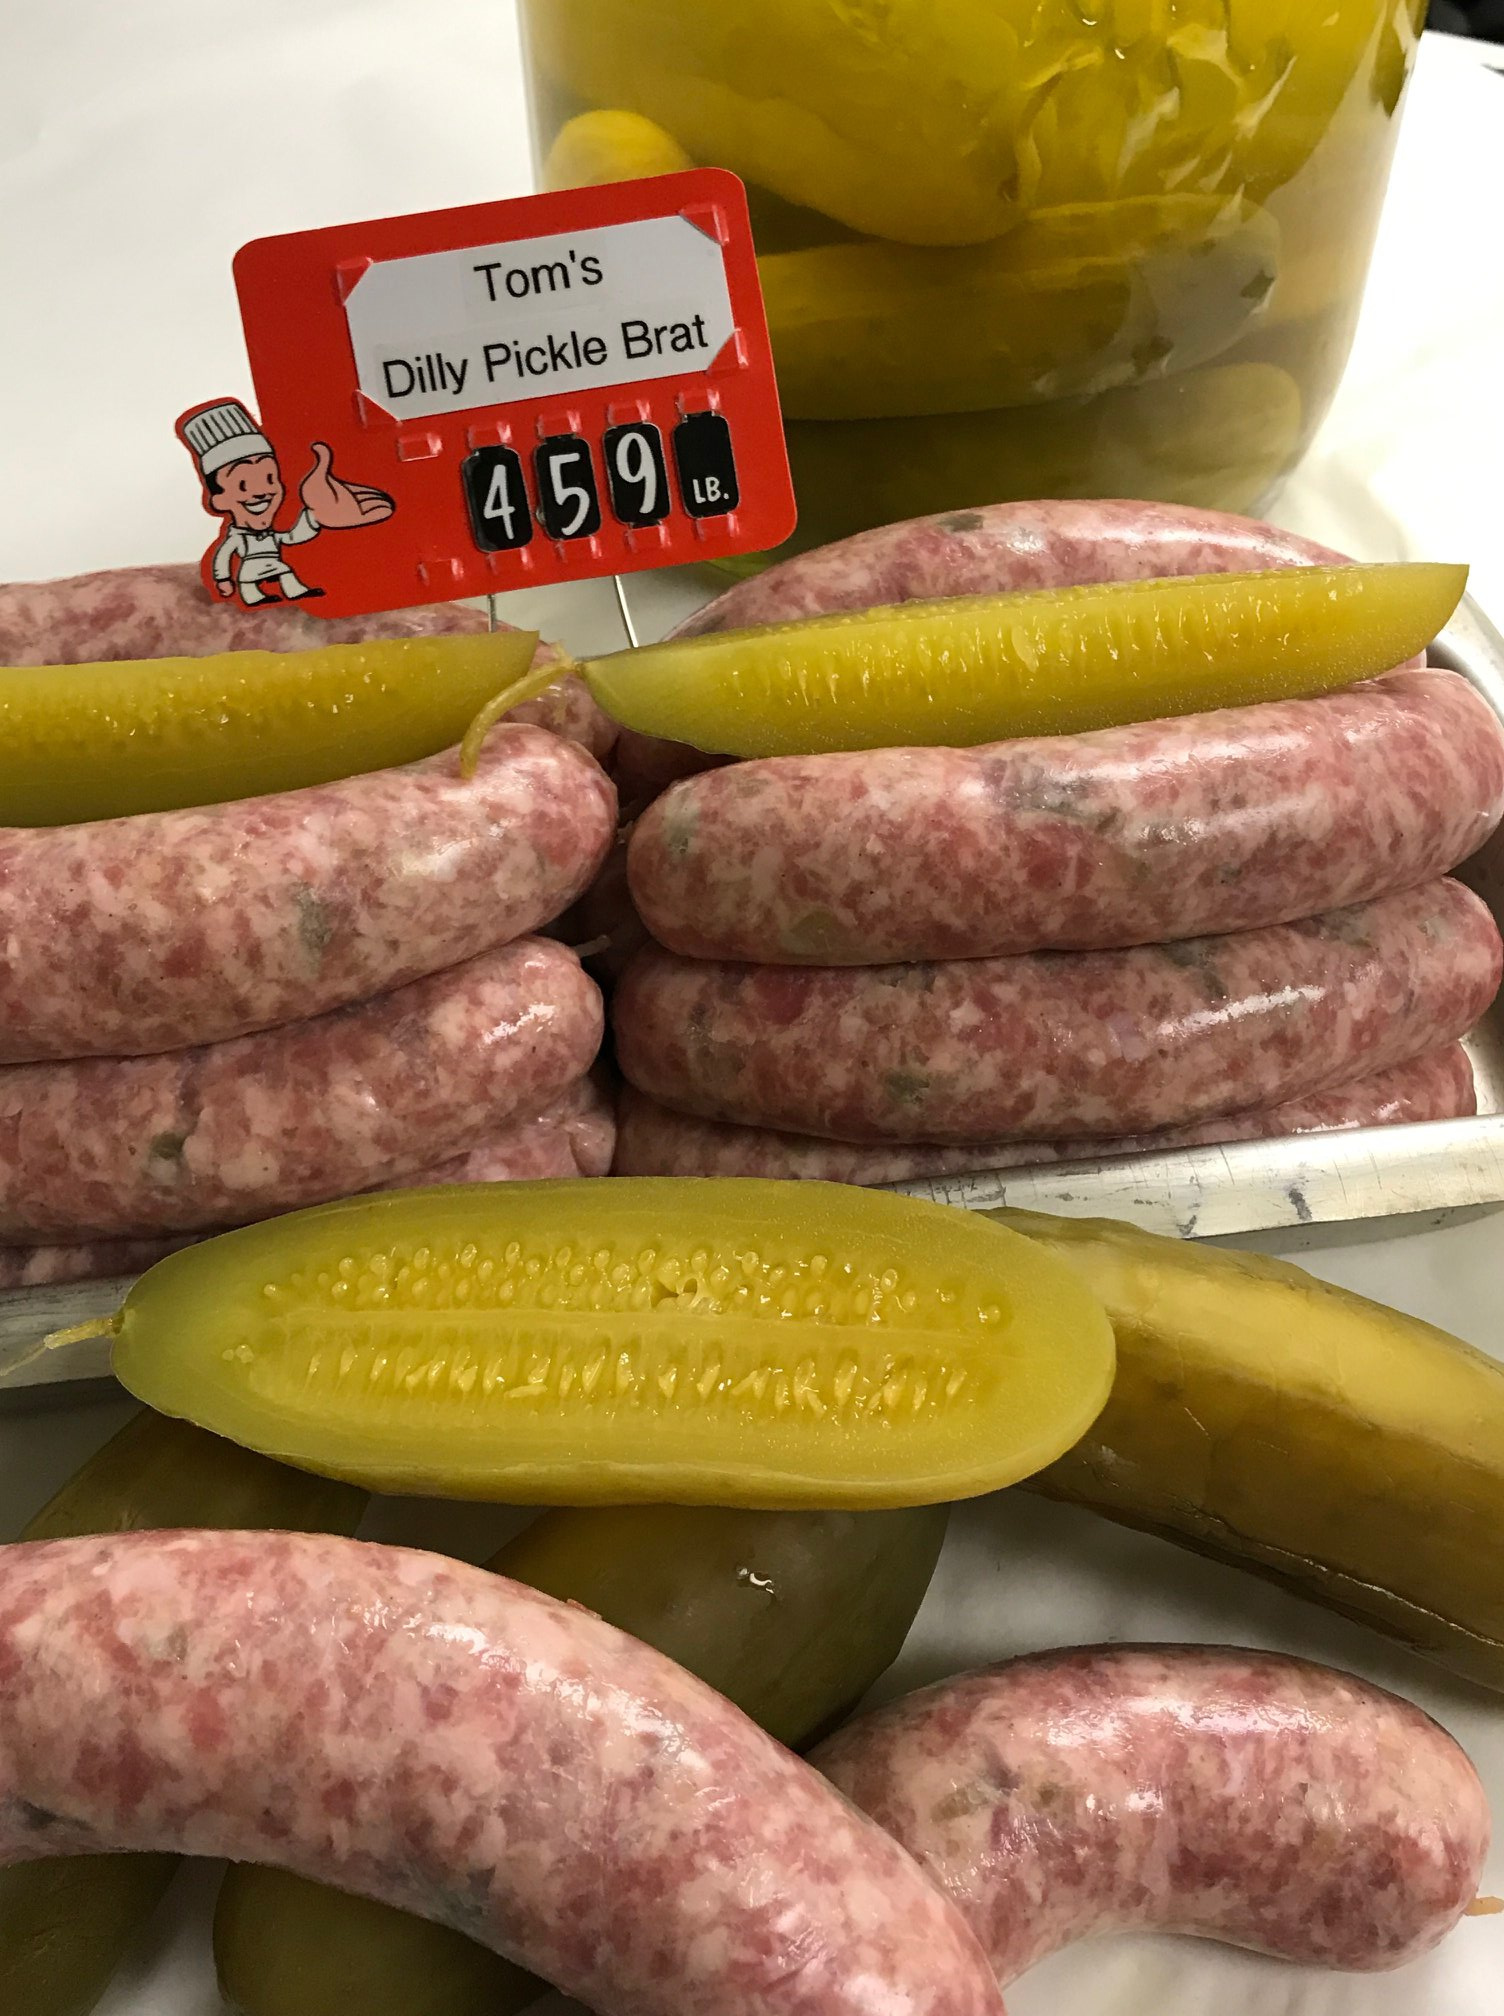 Dilly Pickle Brat